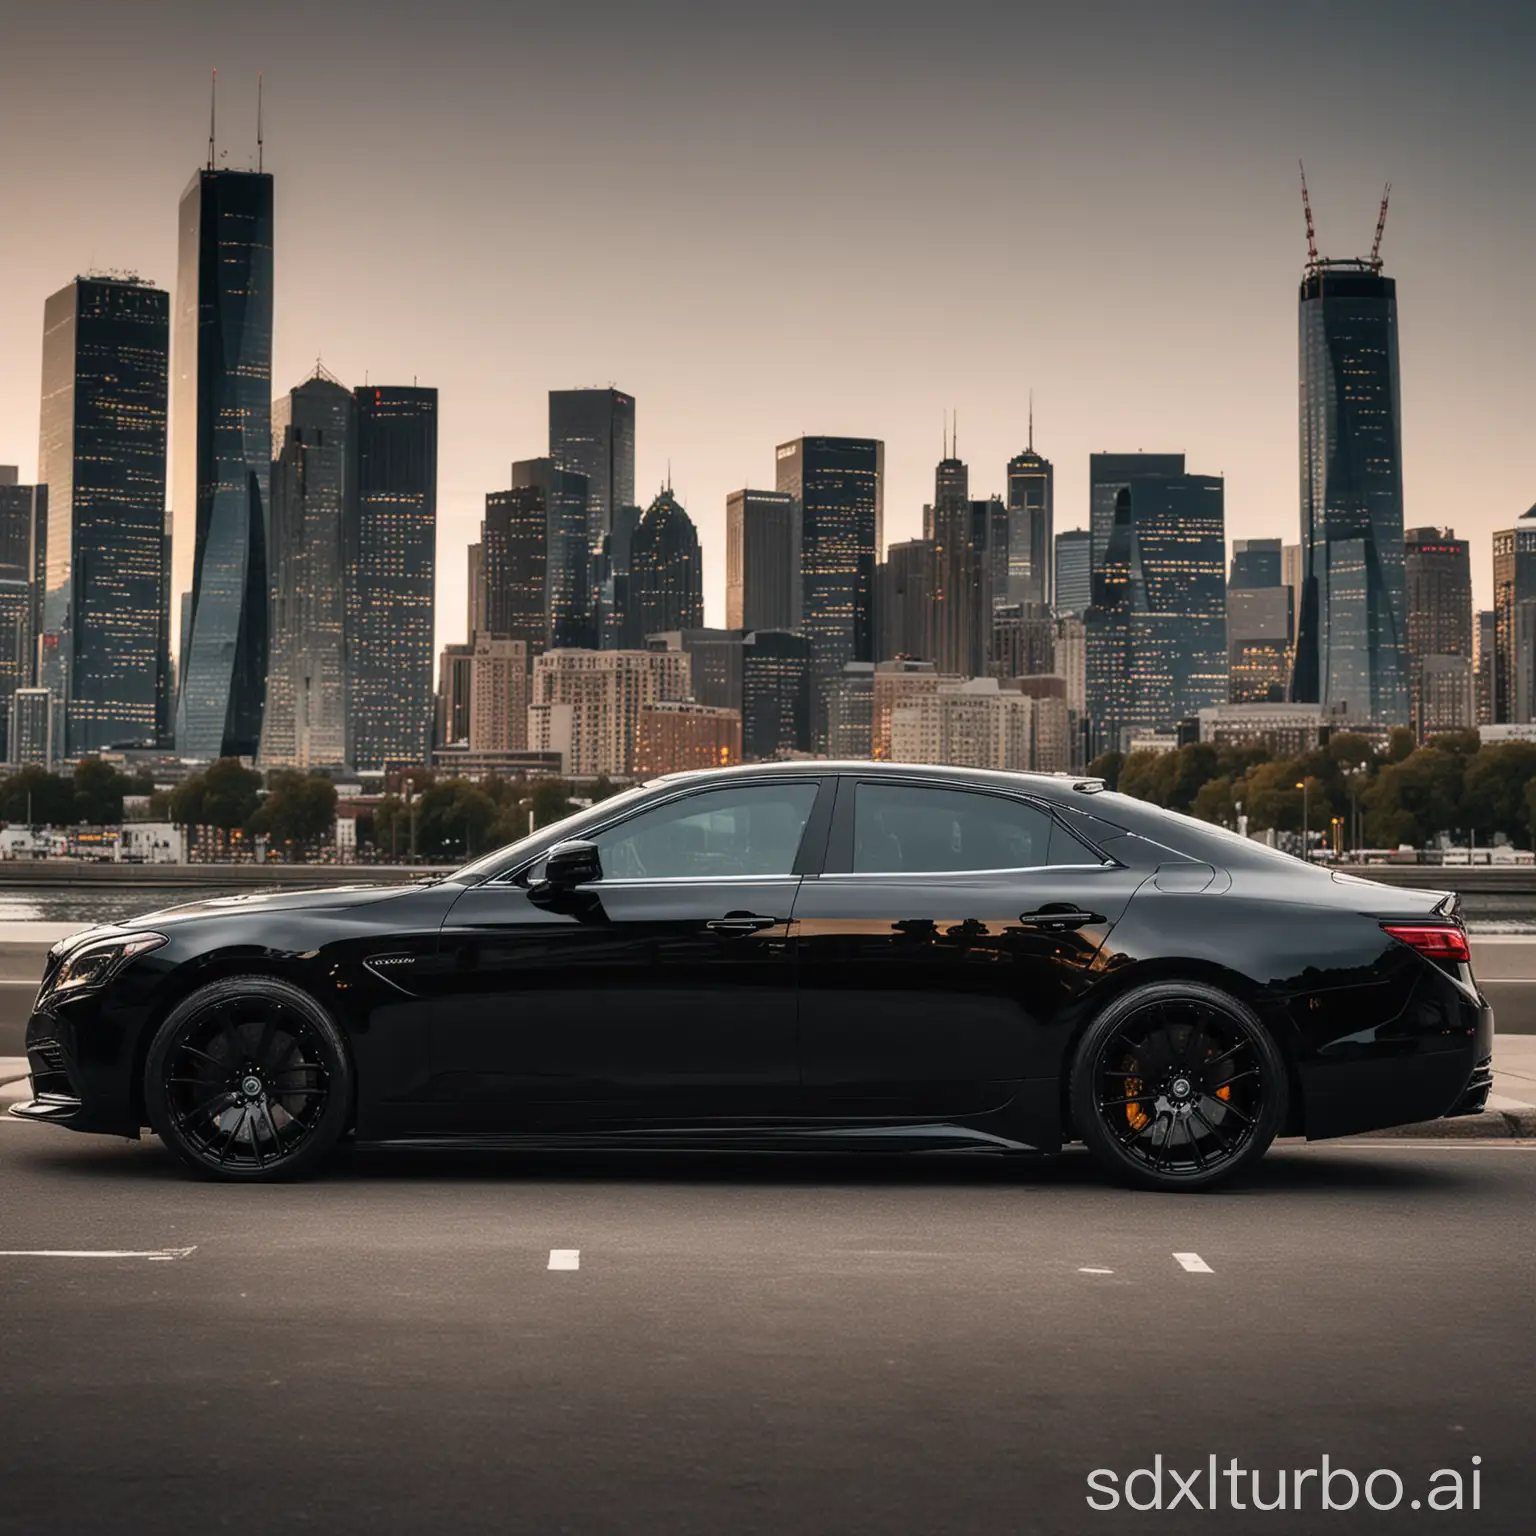 Luxury-Black-Car-Parked-in-Front-of-City-Skyline